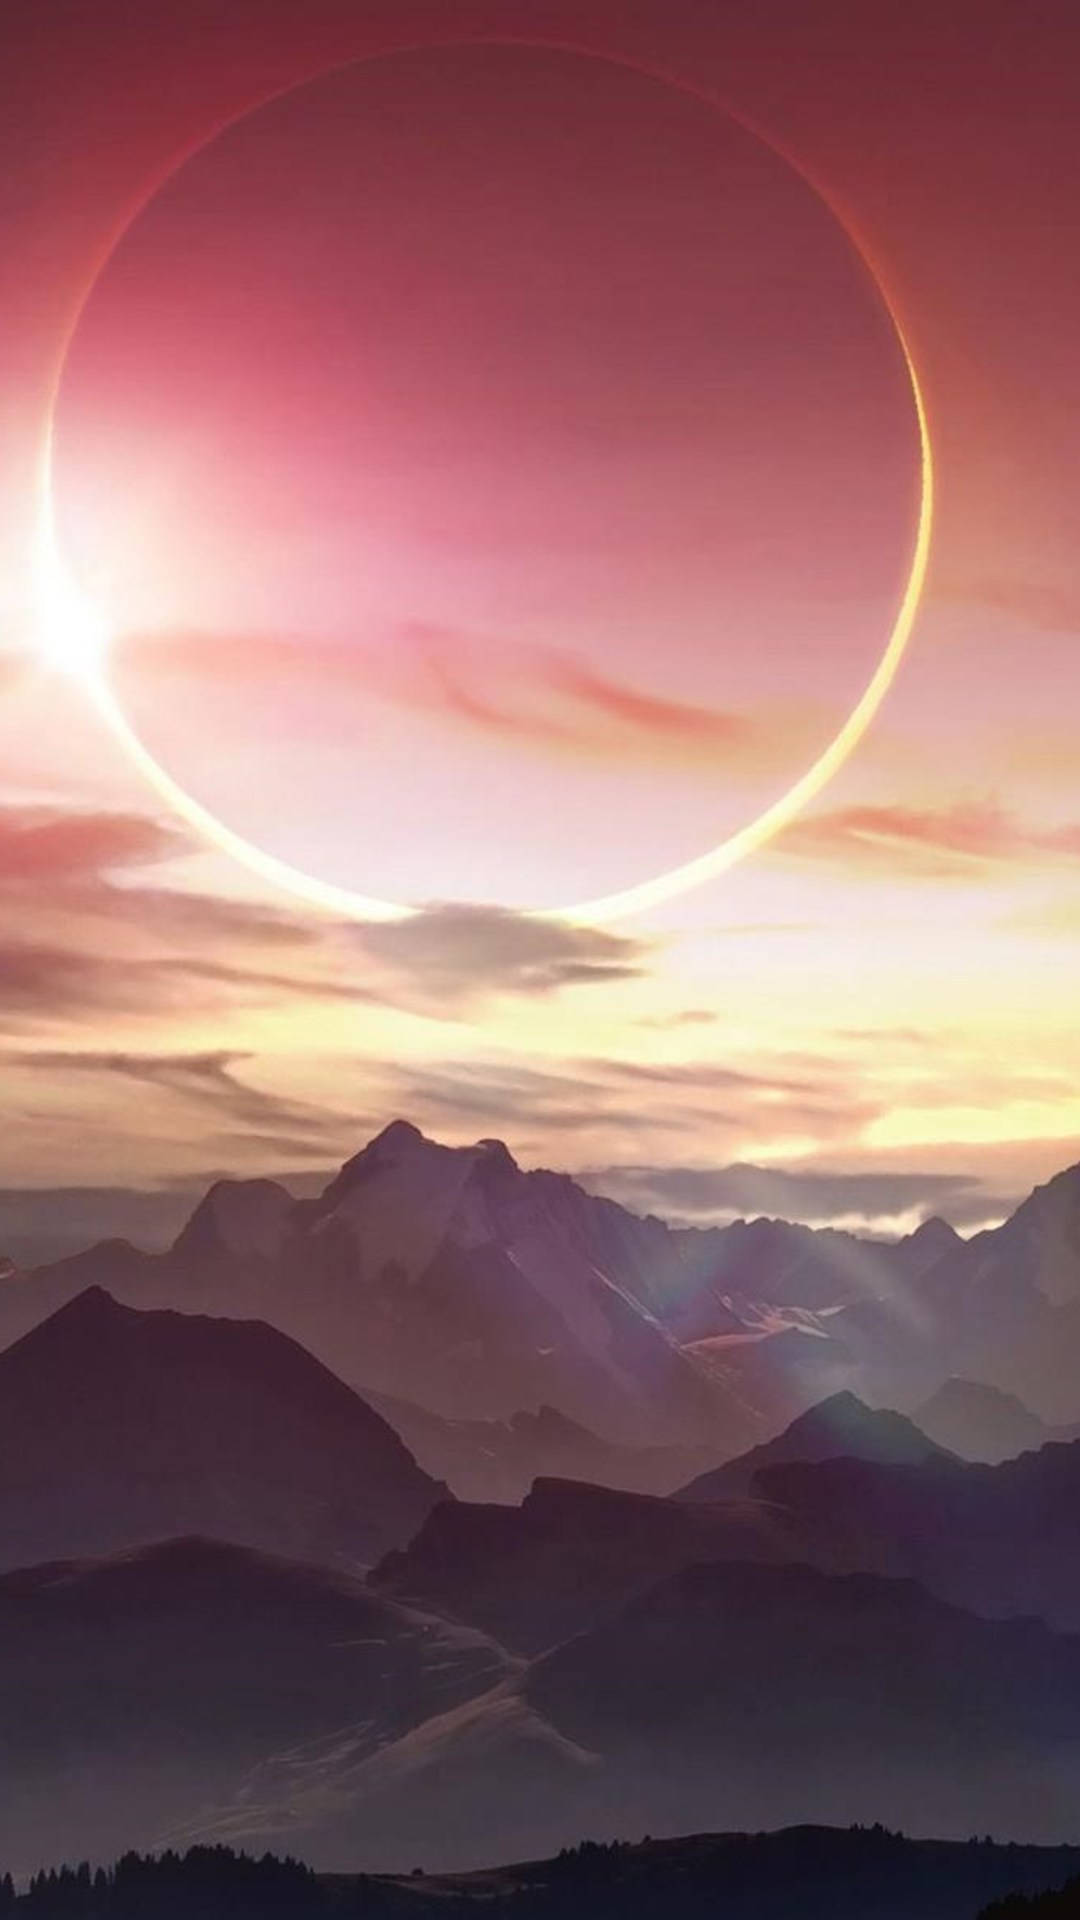 Solar Eclipse Over Mountains Beautiful Wallpaper